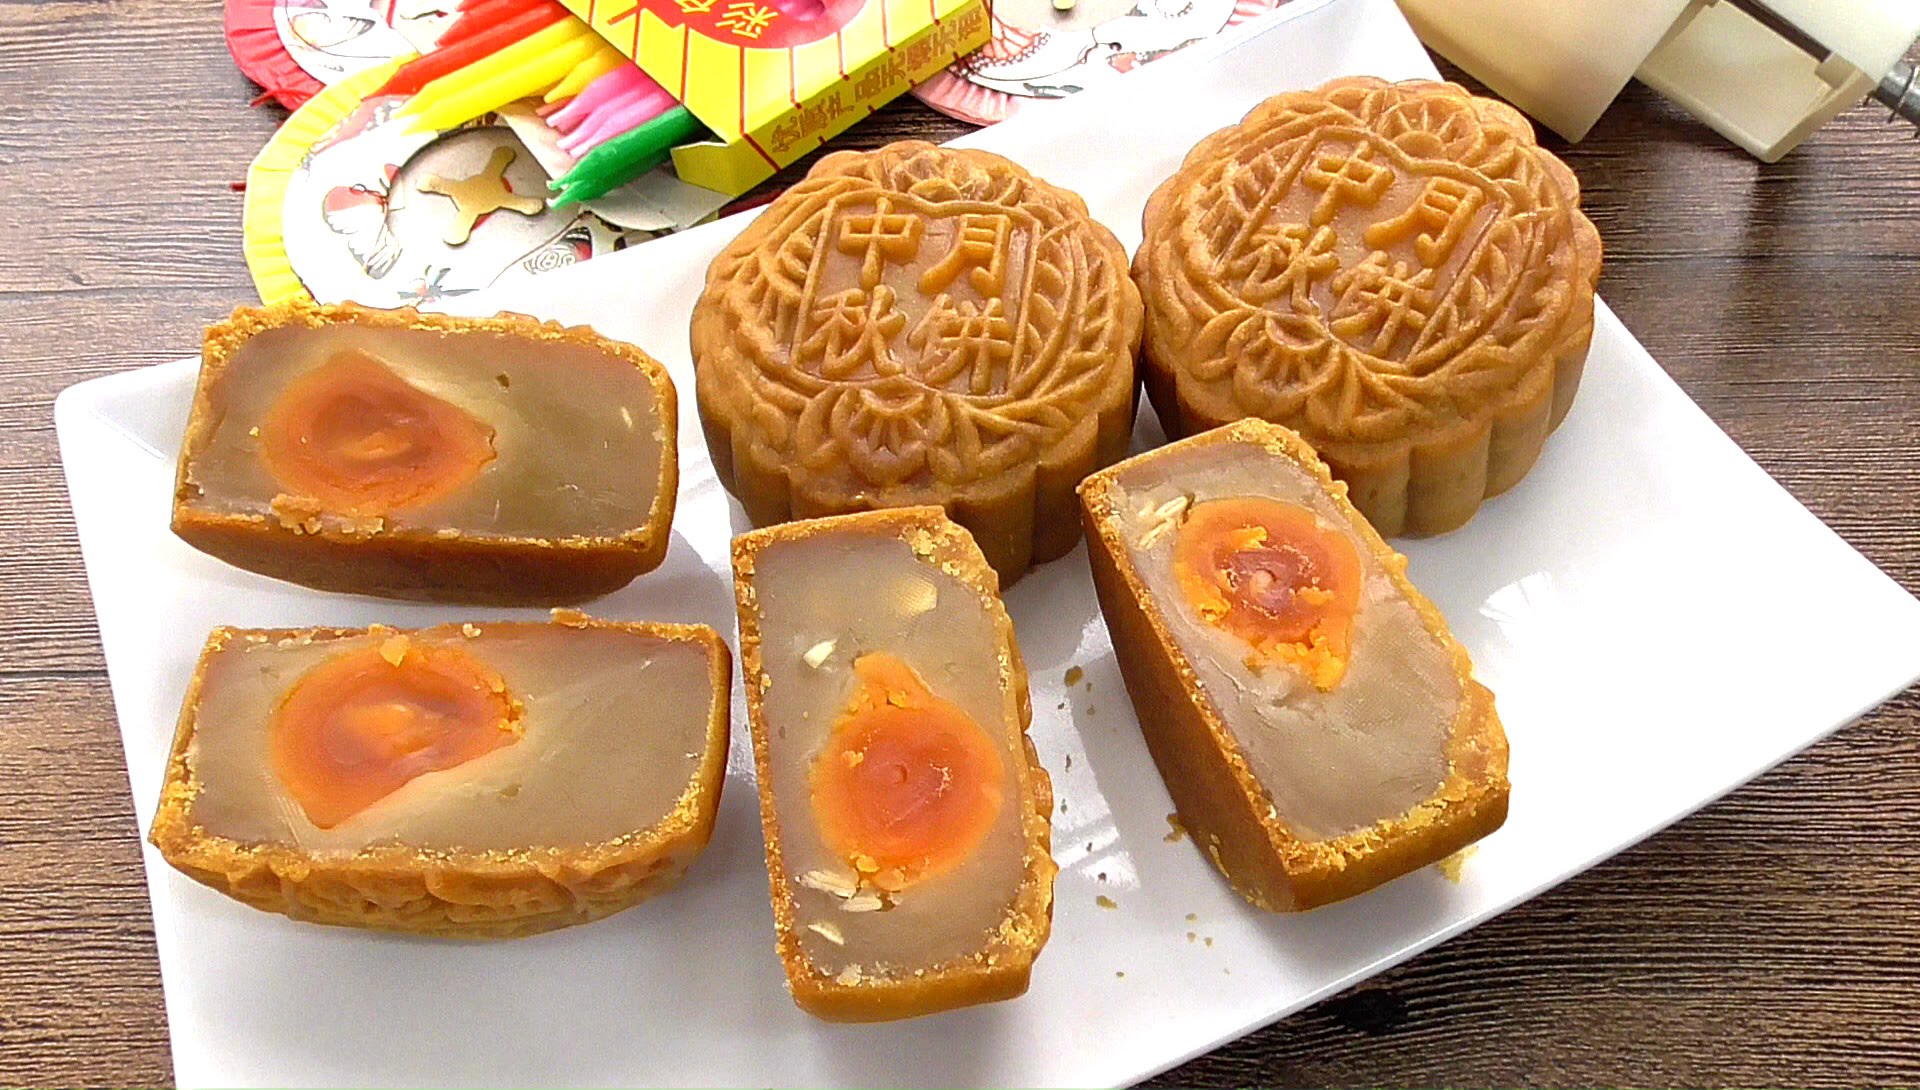 How to Make Traditional Mooncake Step by Step | Mykitchen101en - YouTube